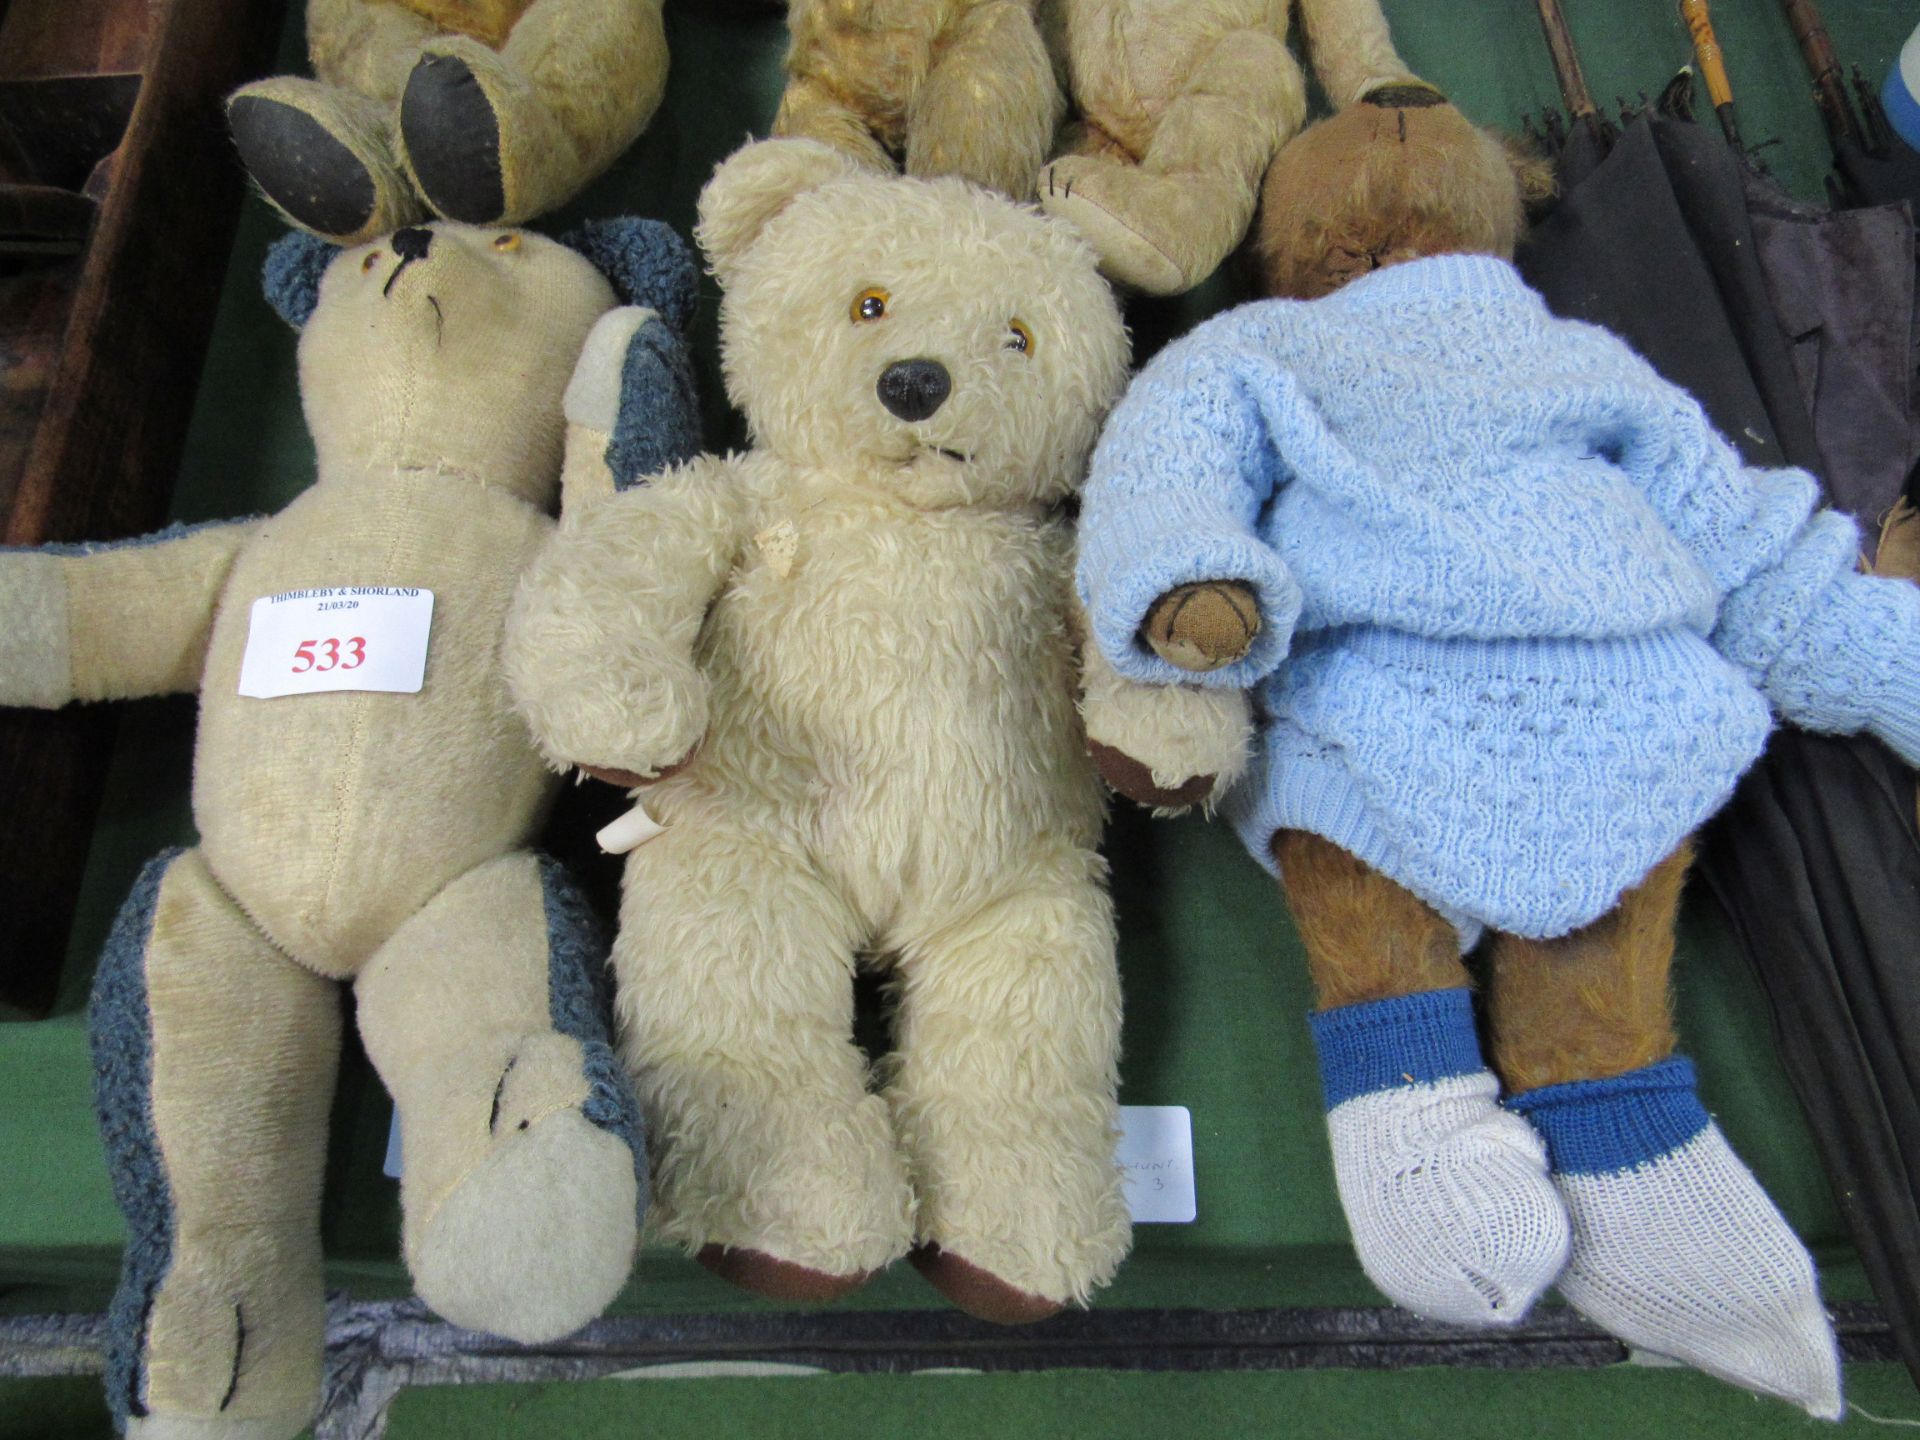 6 antique and vintage teddy bears. Estimate £60-80.